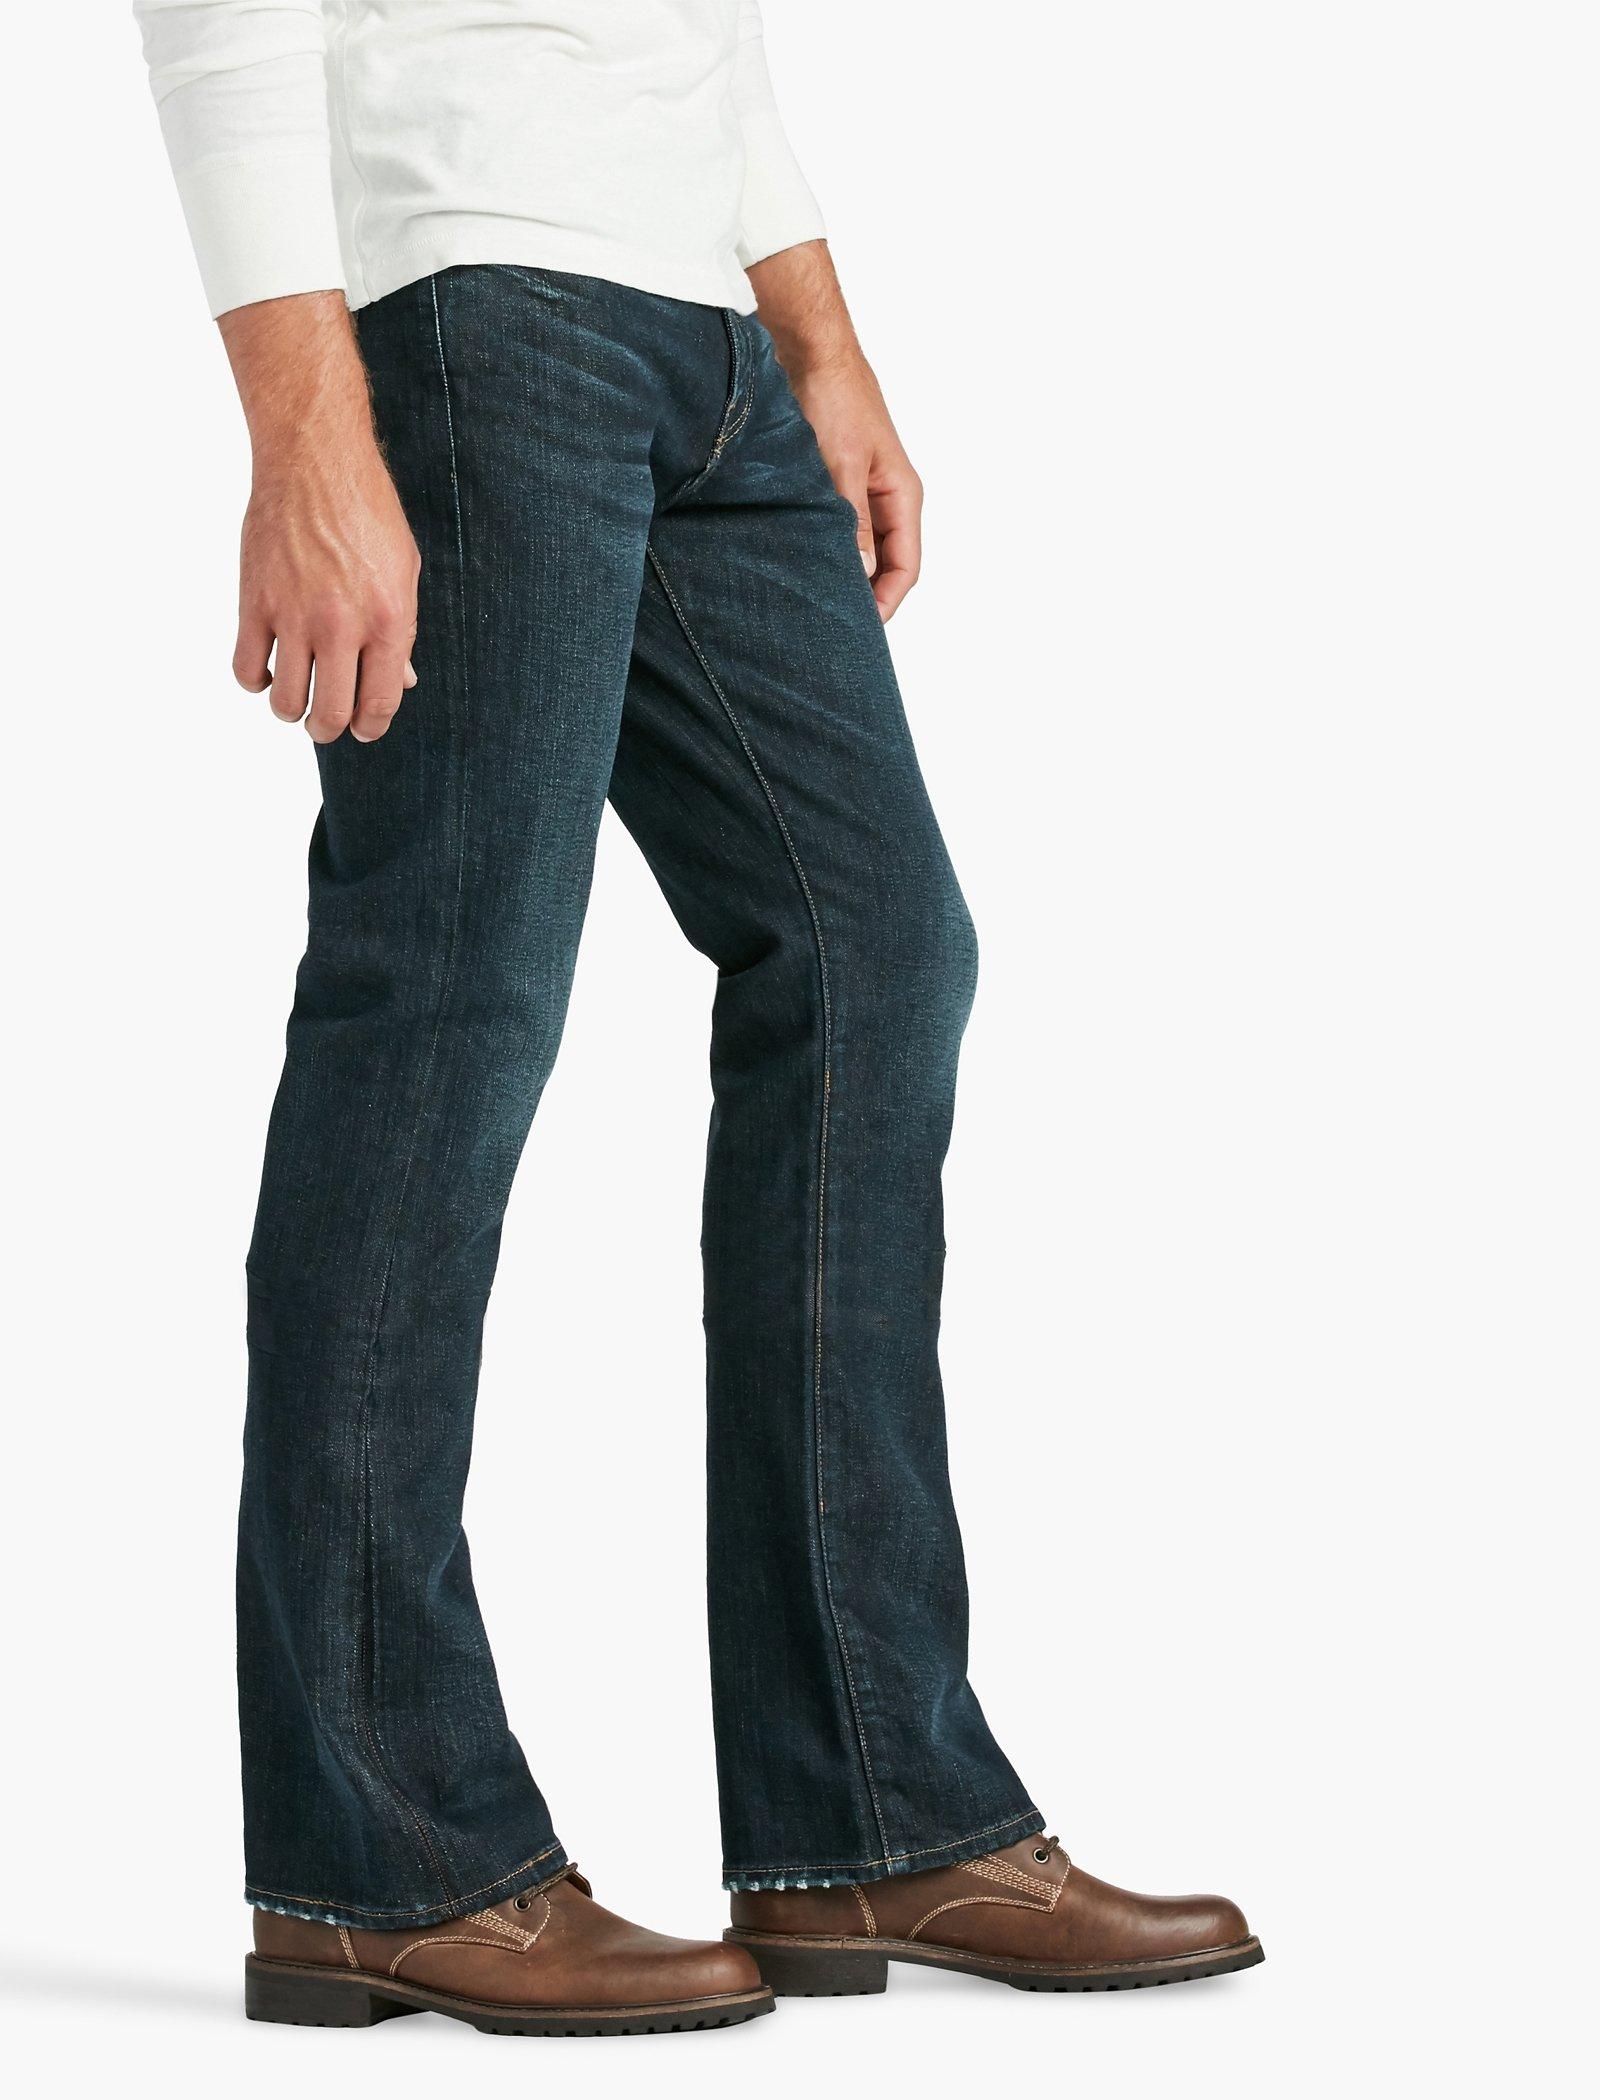 athletic fit bootcut jeans